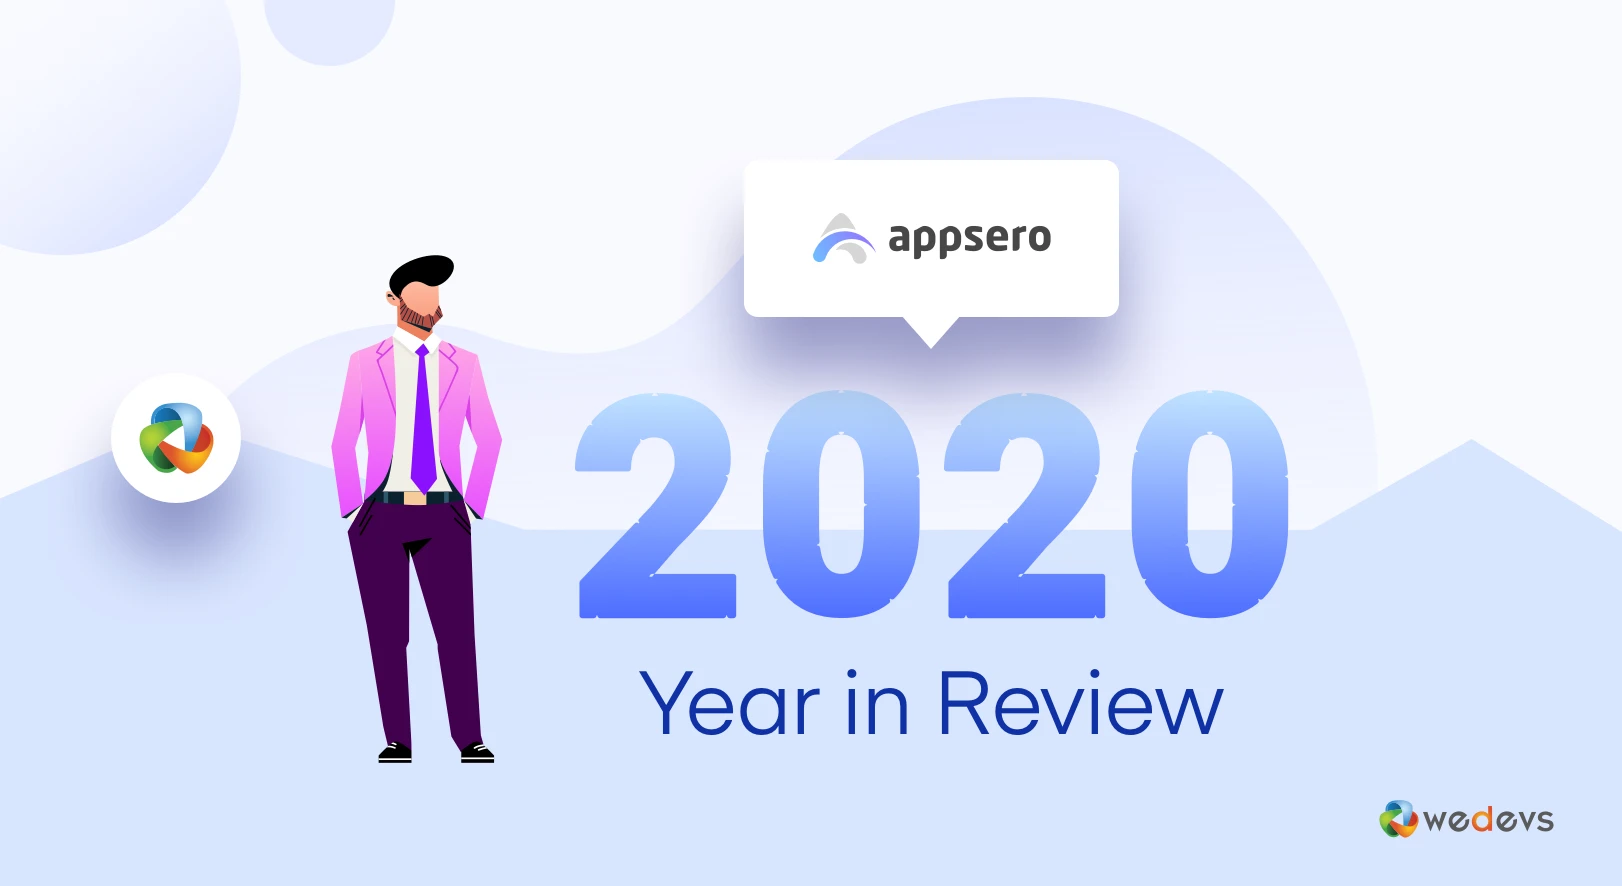 Appsero Review 2020: A Year of Serving WordPress Developers to Make Their Business Journey Easier